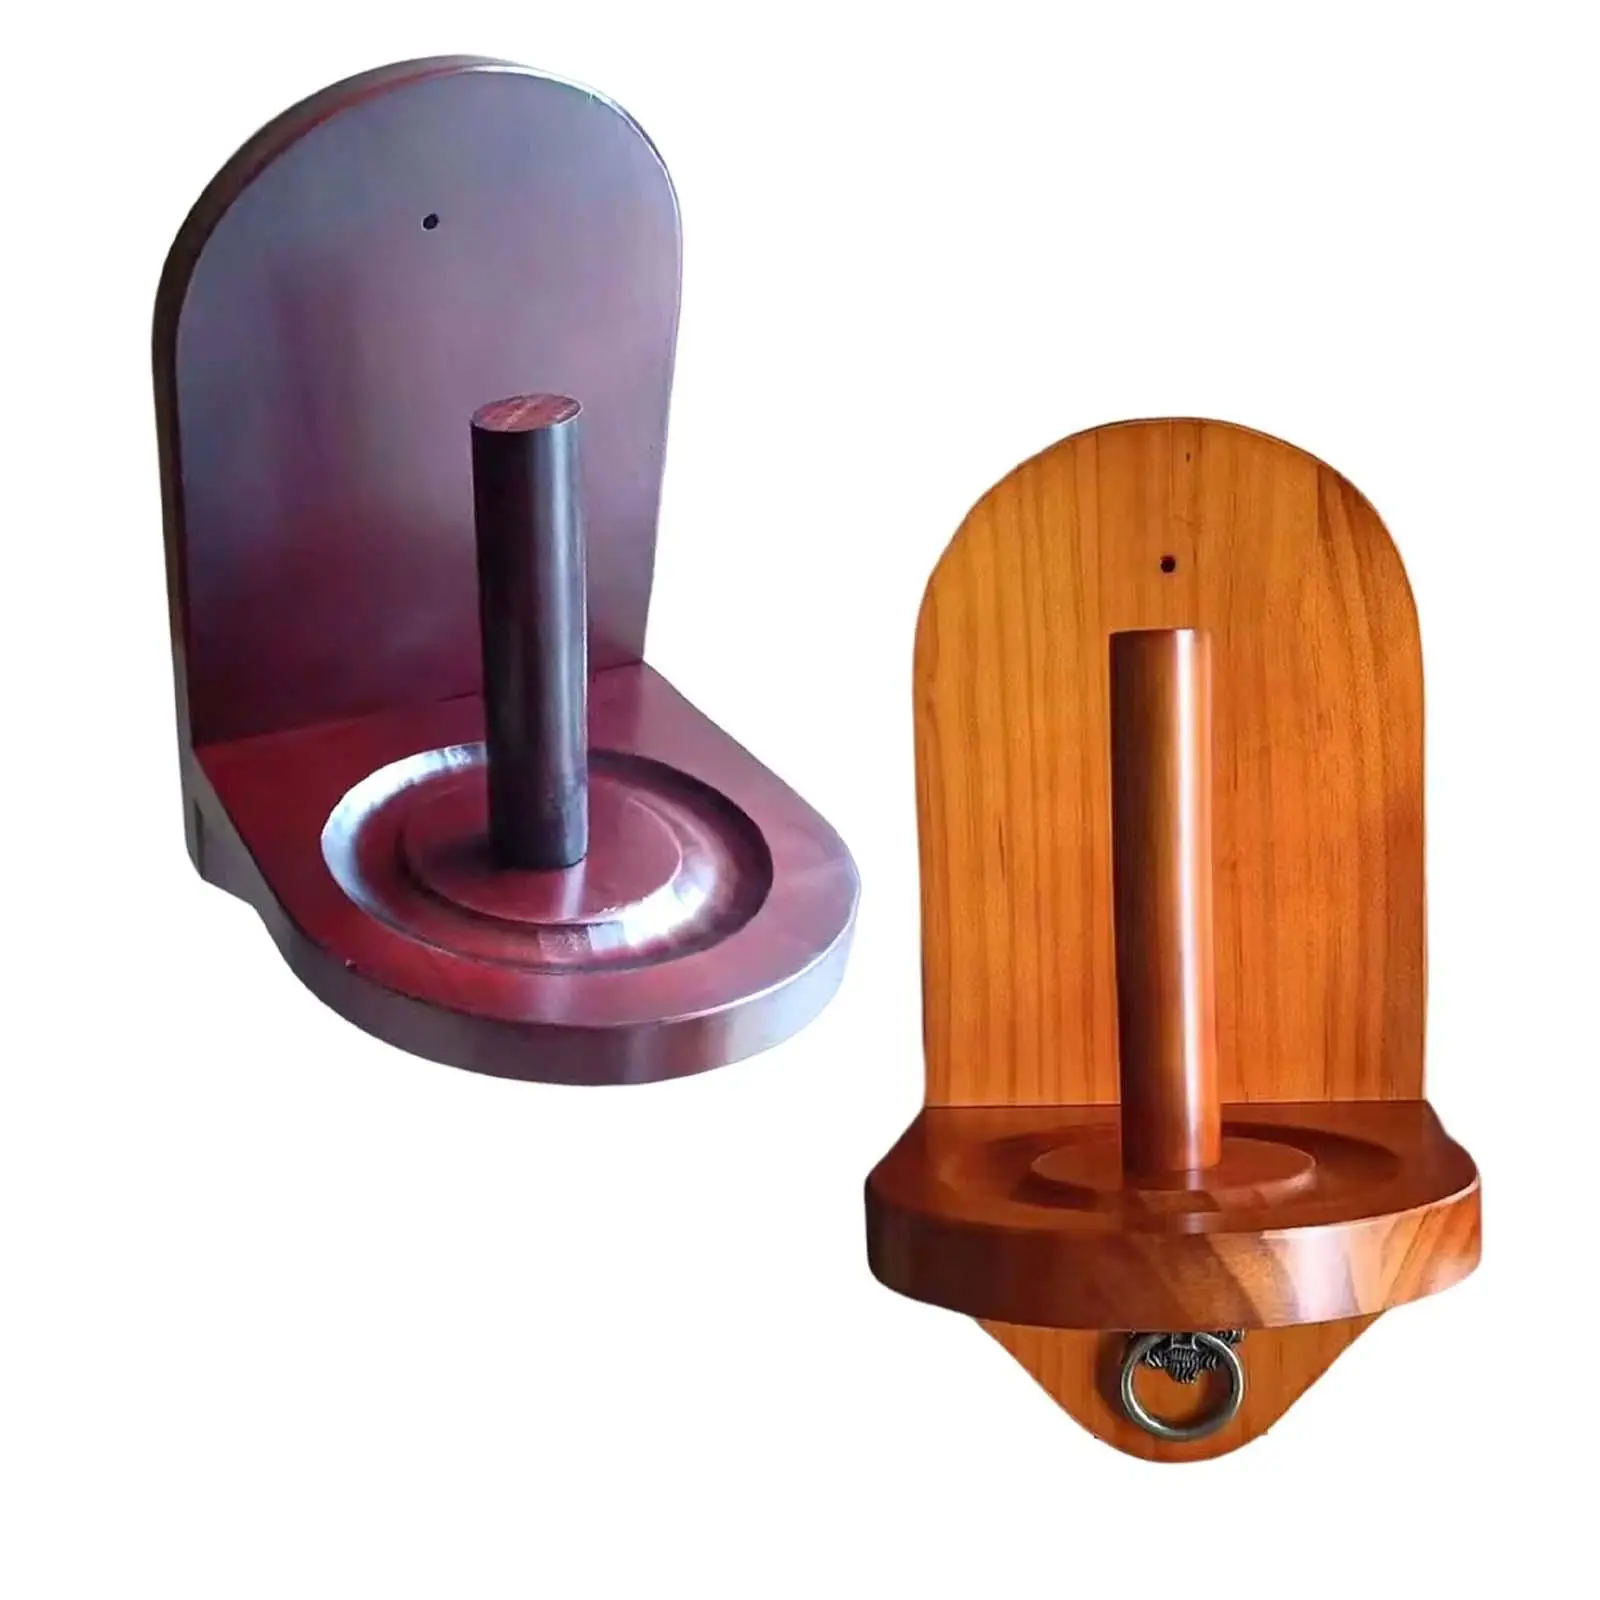 Wooden Cone Chalk Holder Wall Mount Pool Hand Chalk Holder for Billiards Pool Table Game Accessory Supplies